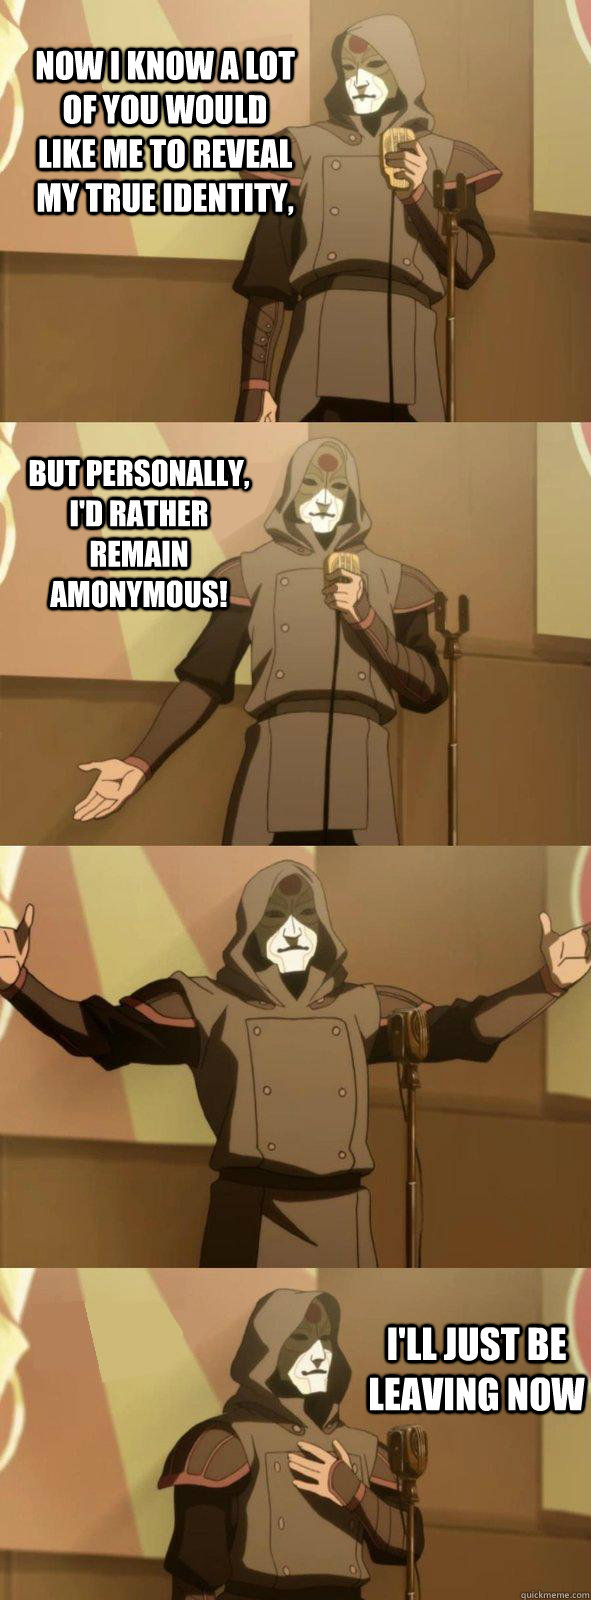 Now I know a lot of you would like me to reveal my true identity, I'll just be leaving now But personally, I'd rather remain amonymous! - Now I know a lot of you would like me to reveal my true identity, I'll just be leaving now But personally, I'd rather remain amonymous!  Bad Joke Amon